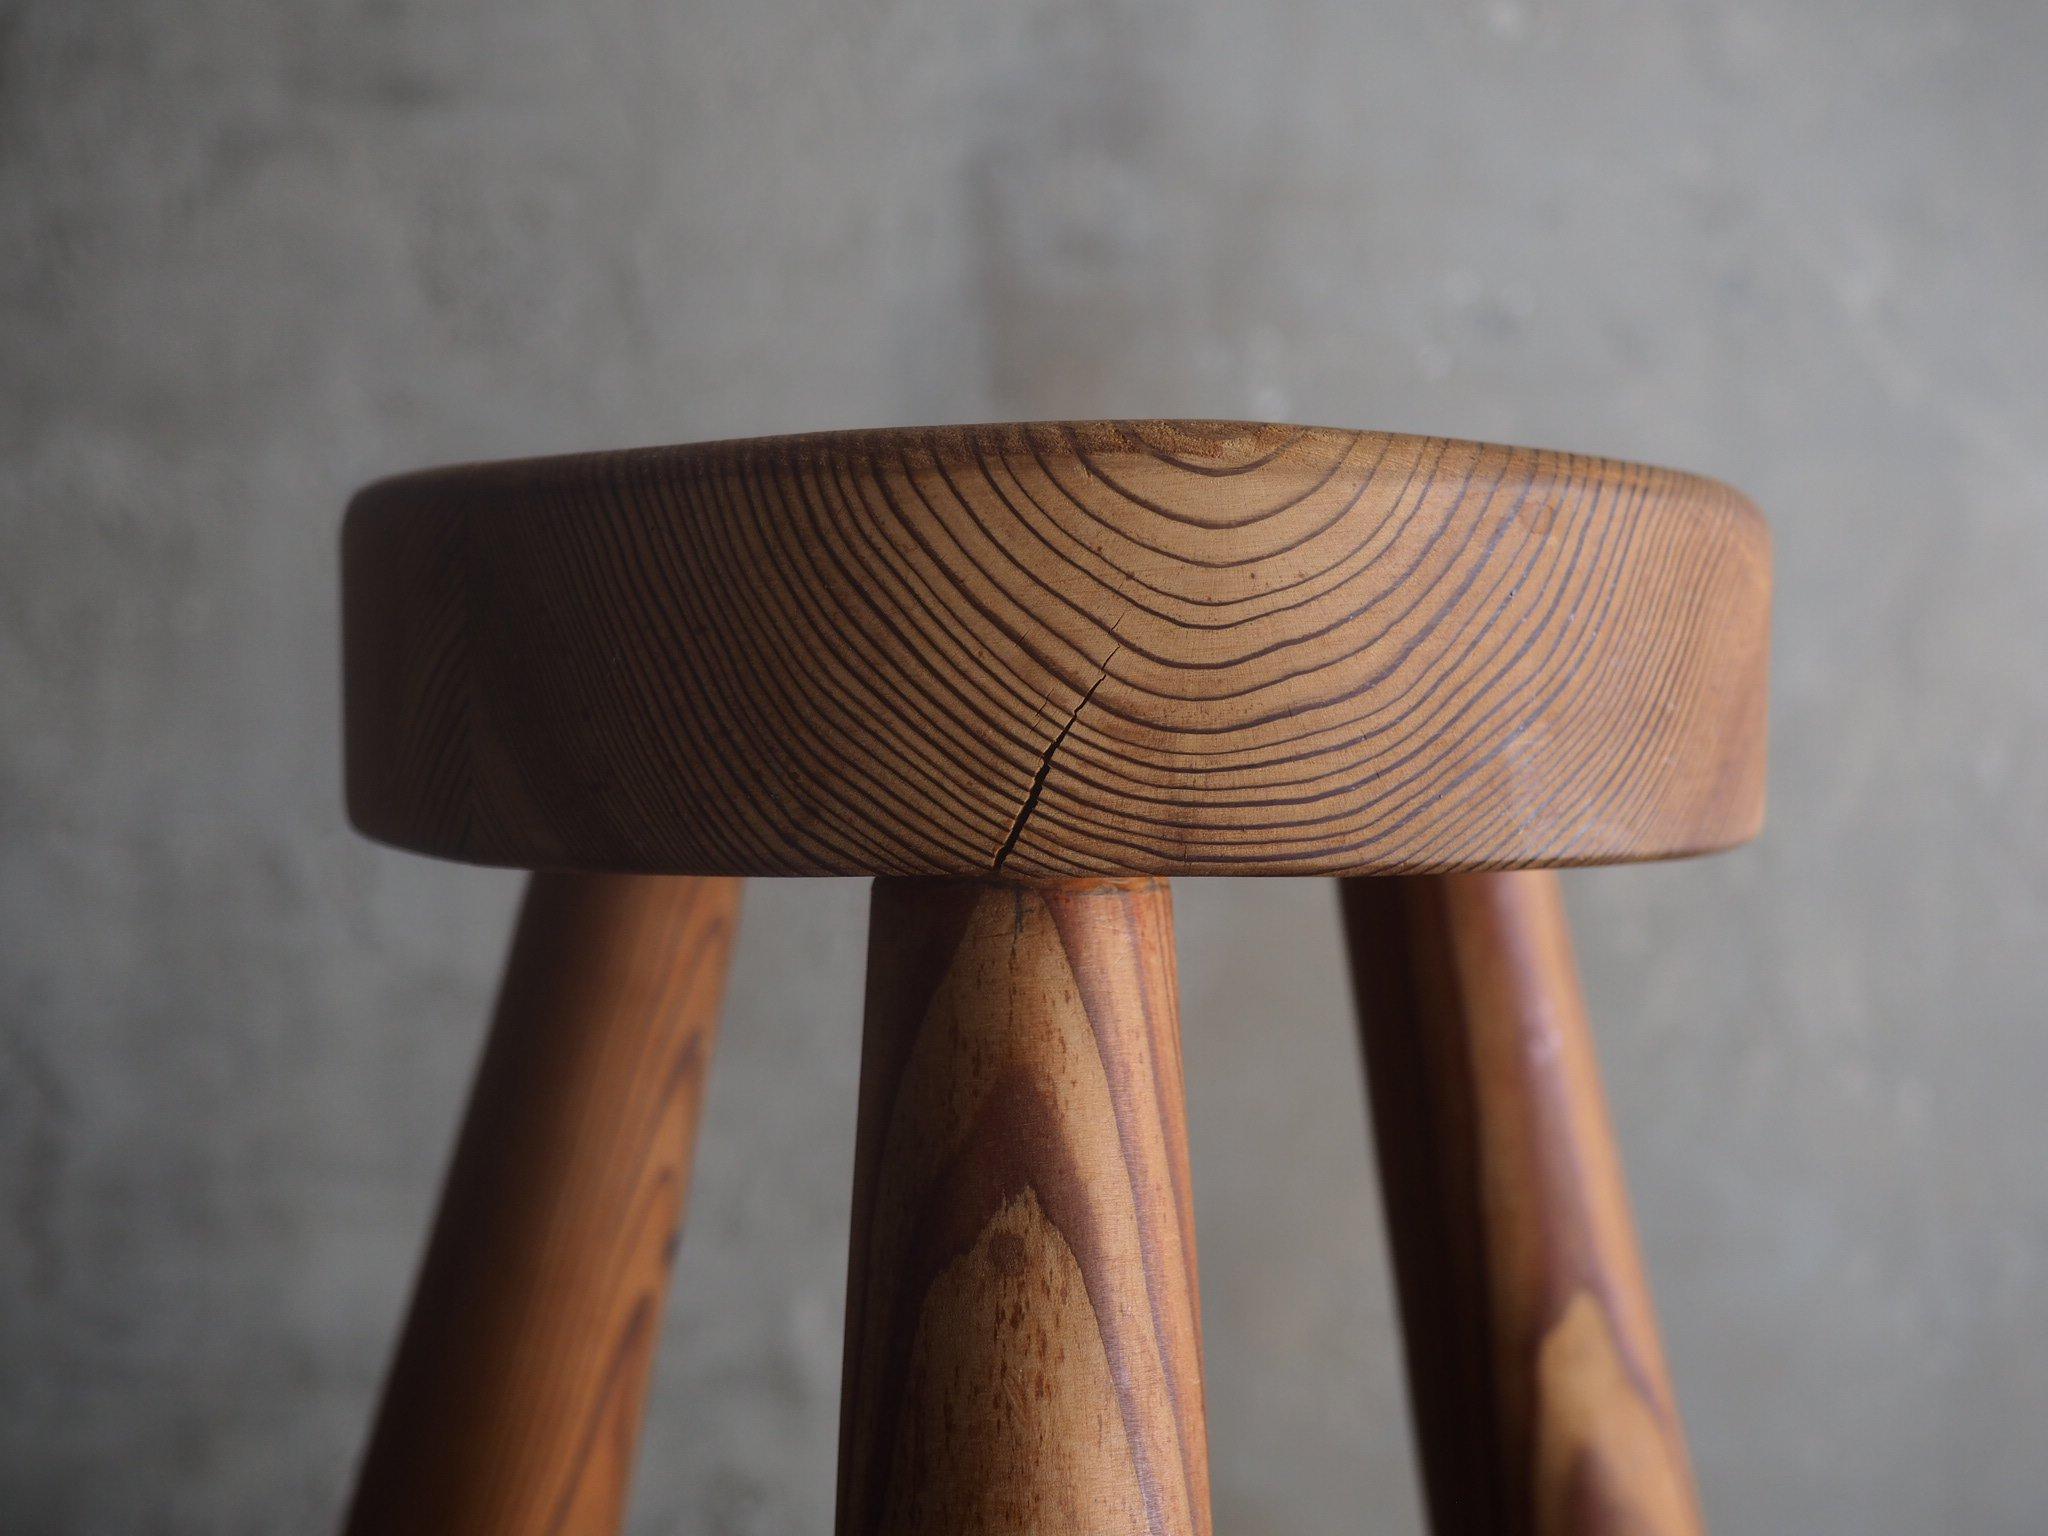 A rare and beautiful stool designed by Ingvar Hildingsson. Light unmatchable patina, with IH signature underneath. Produced by Ingvar Hildingsson in Sweden, 1940s.